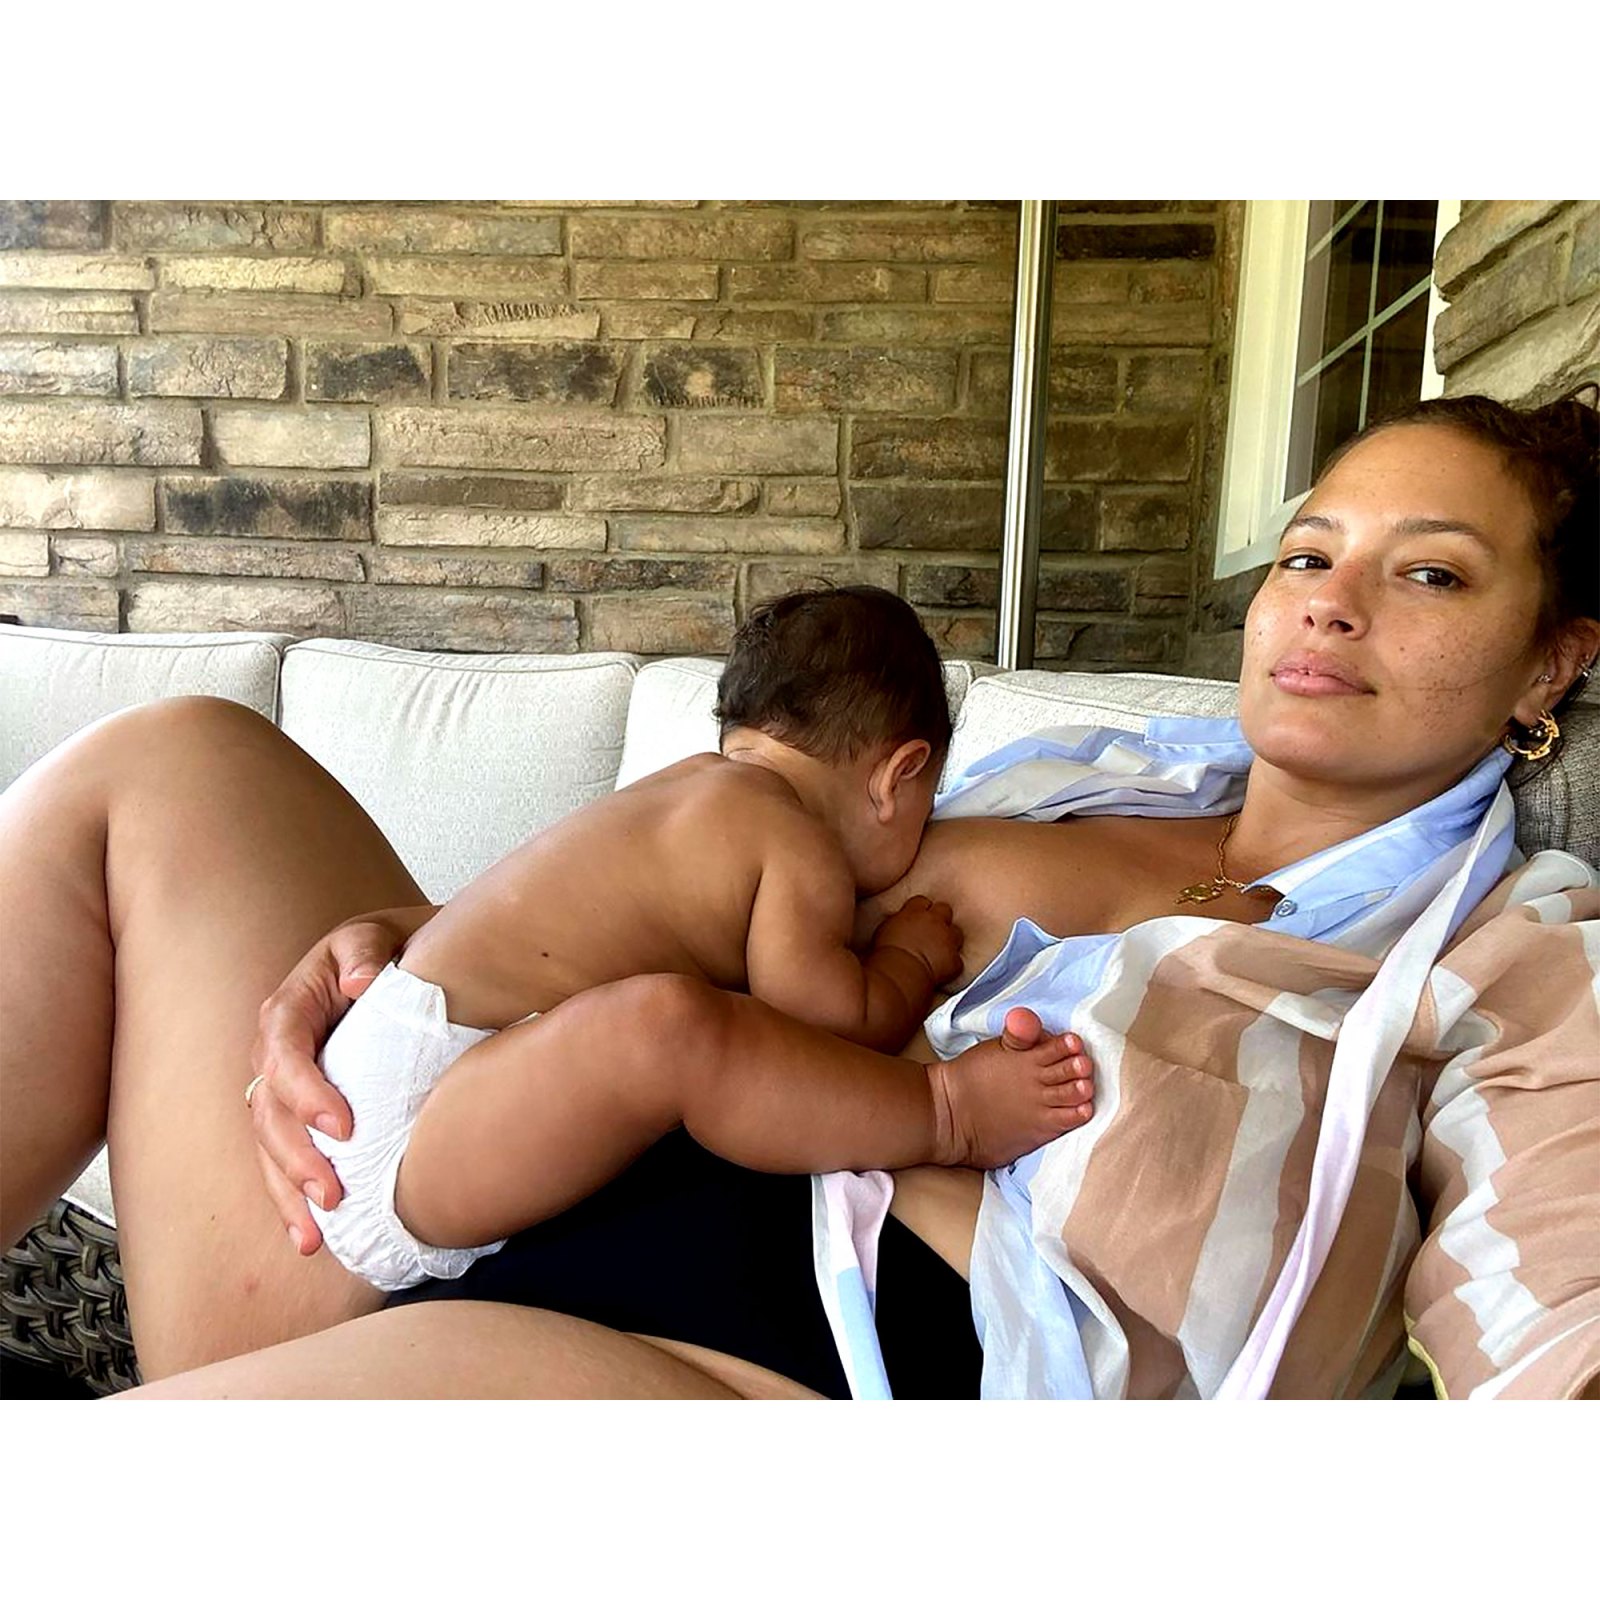 Ashley Graham and Justin Ervin’s Family Photos With Kids Over the Years